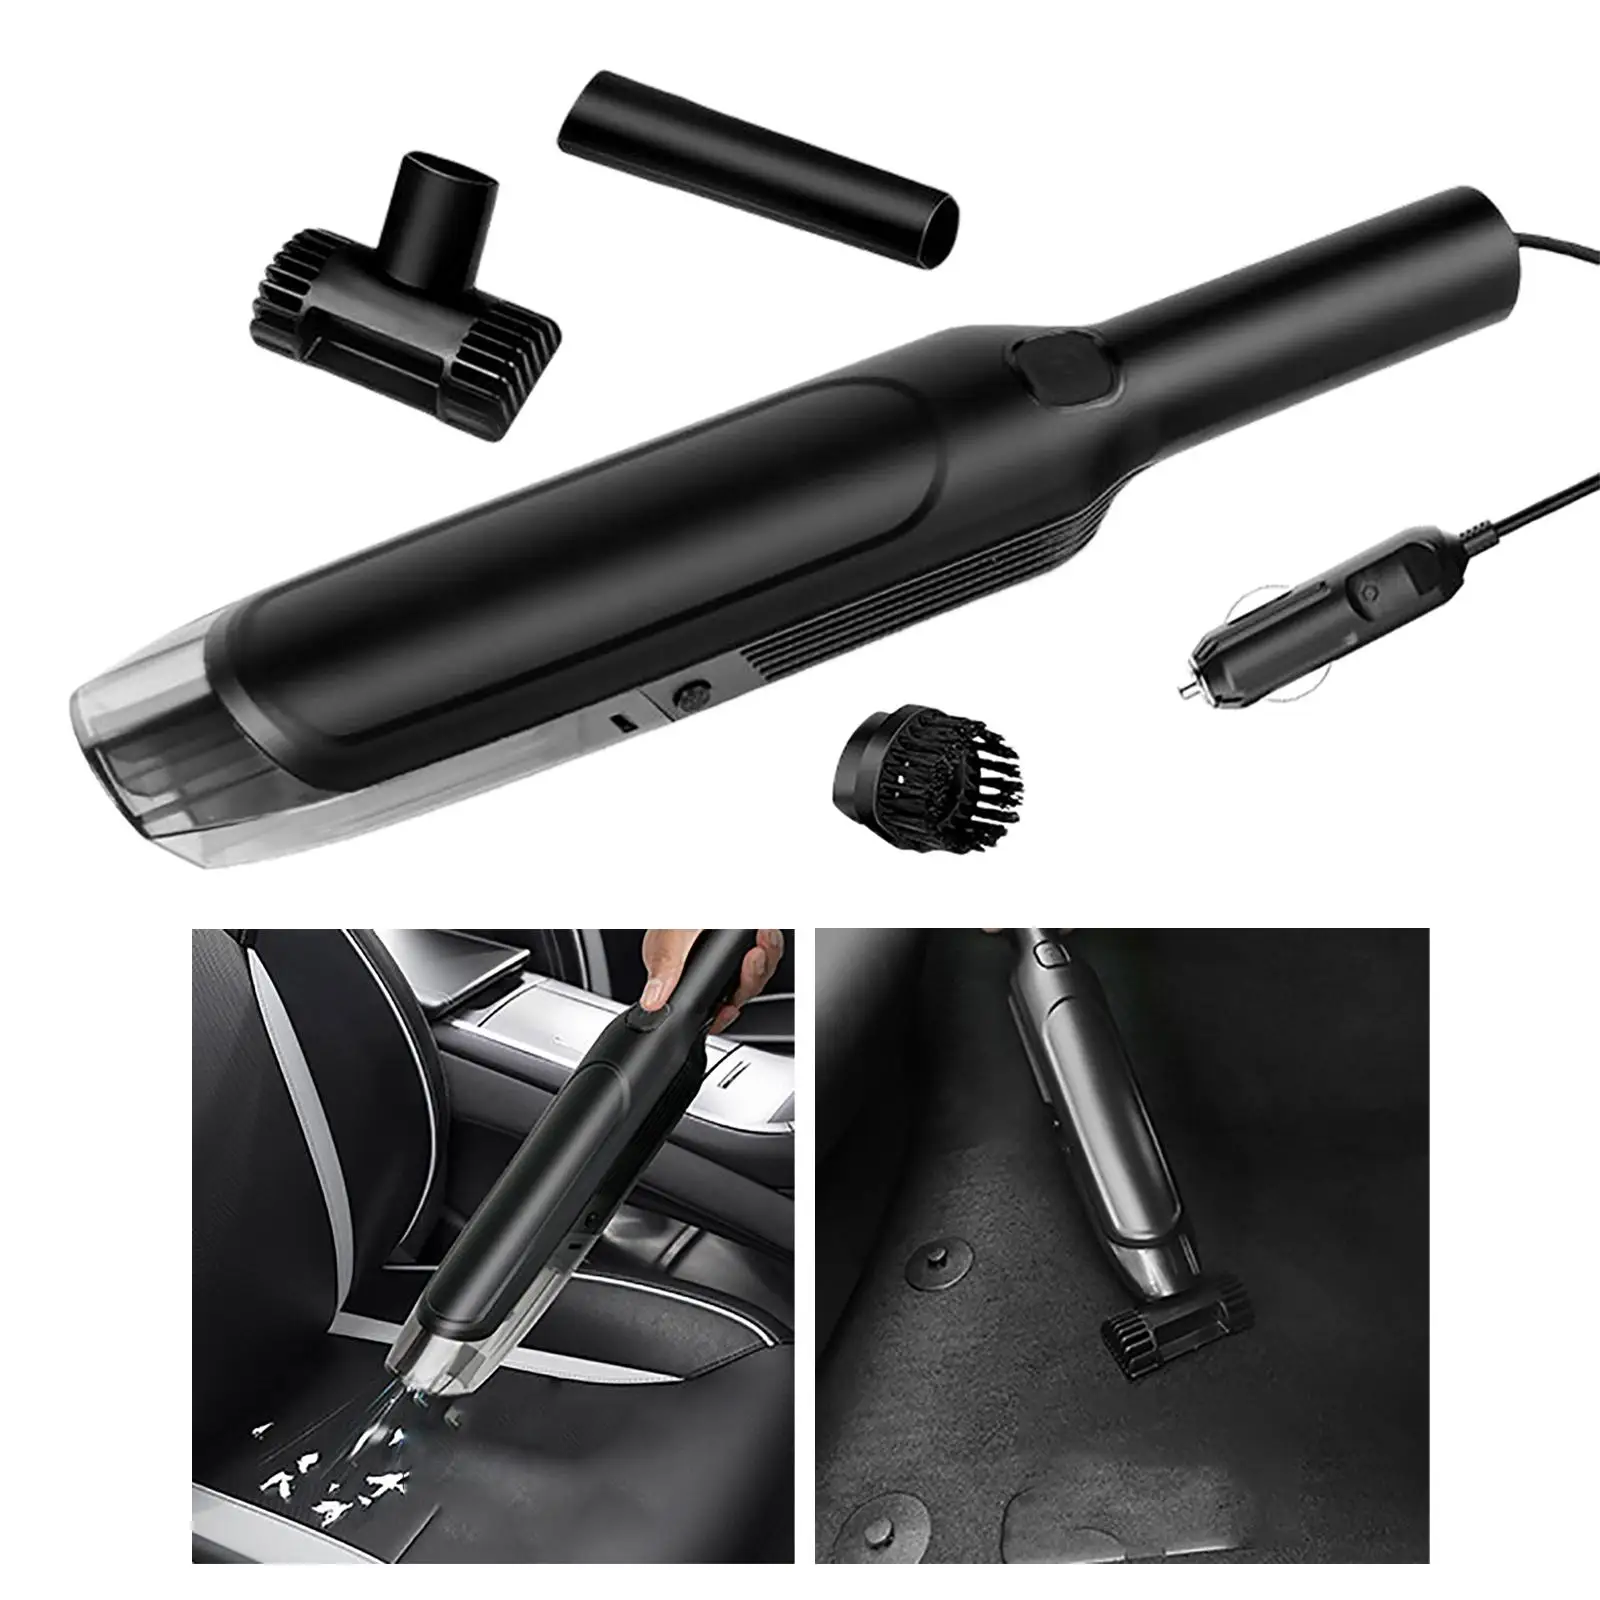  Car Vacuum Cleaner 8000PA Suction Mini Washable 120W Portable Handheld Vacuum for Car Crevices  Charge